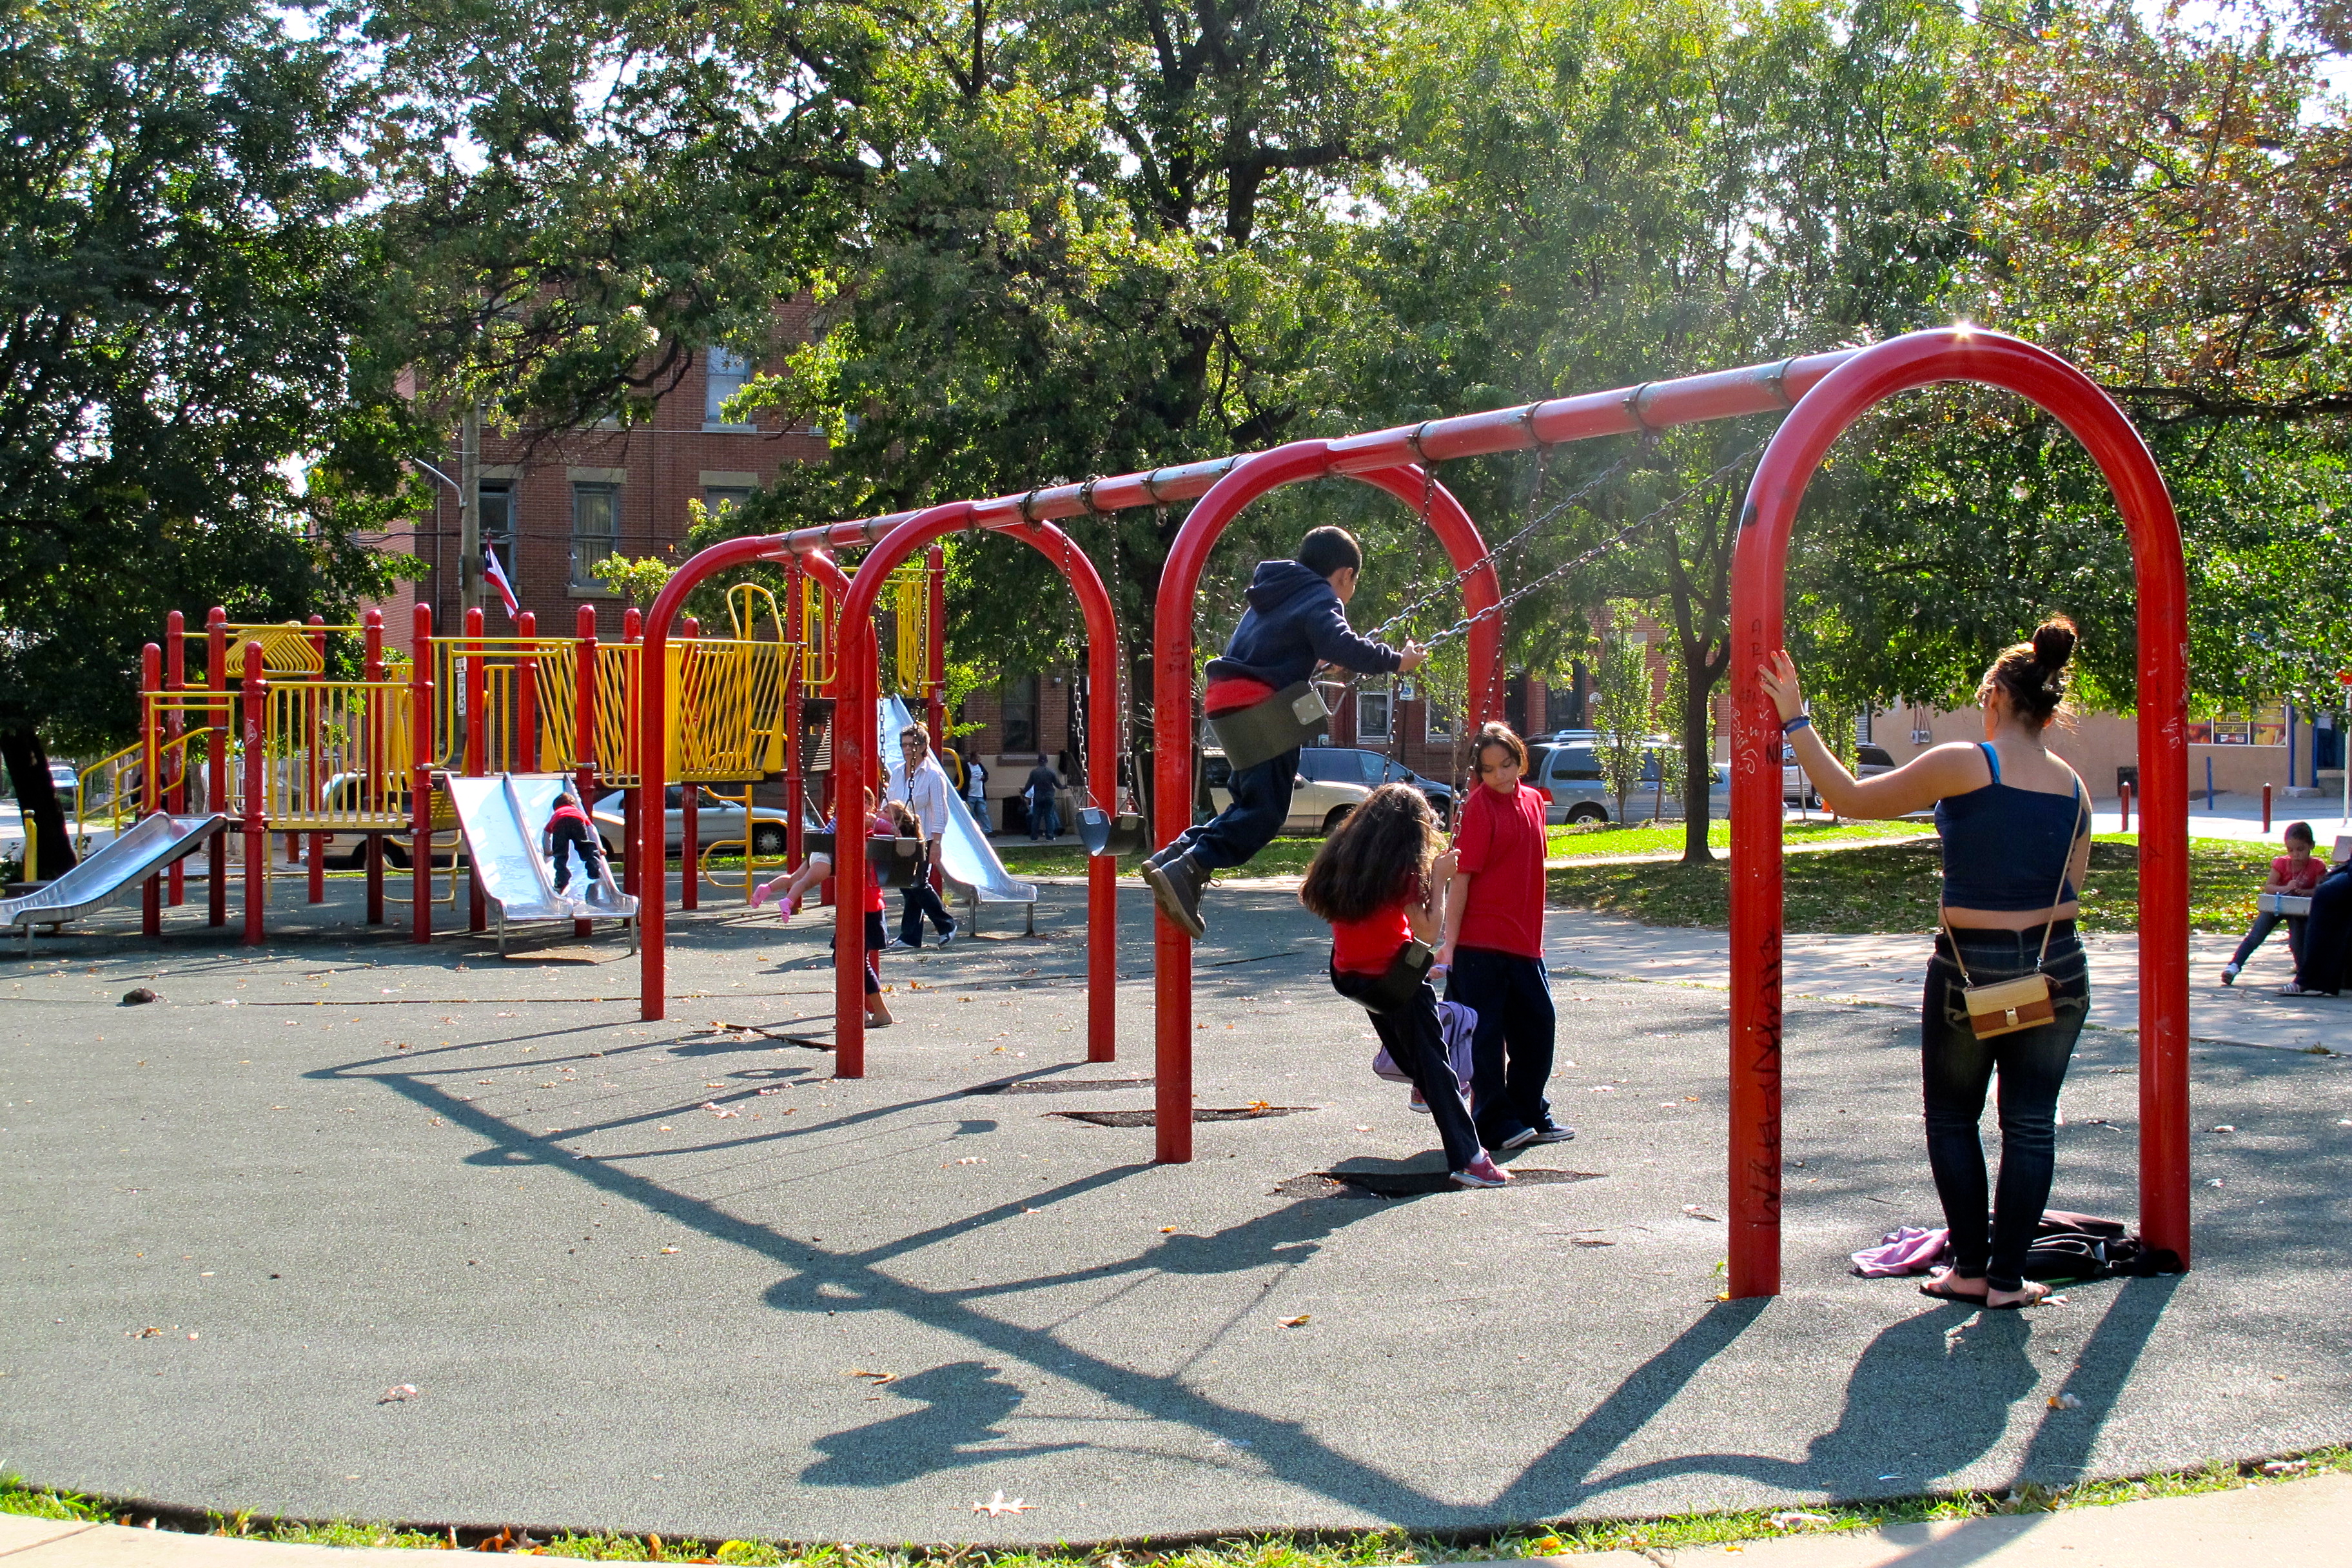 Fairhill Square's playground is well-used